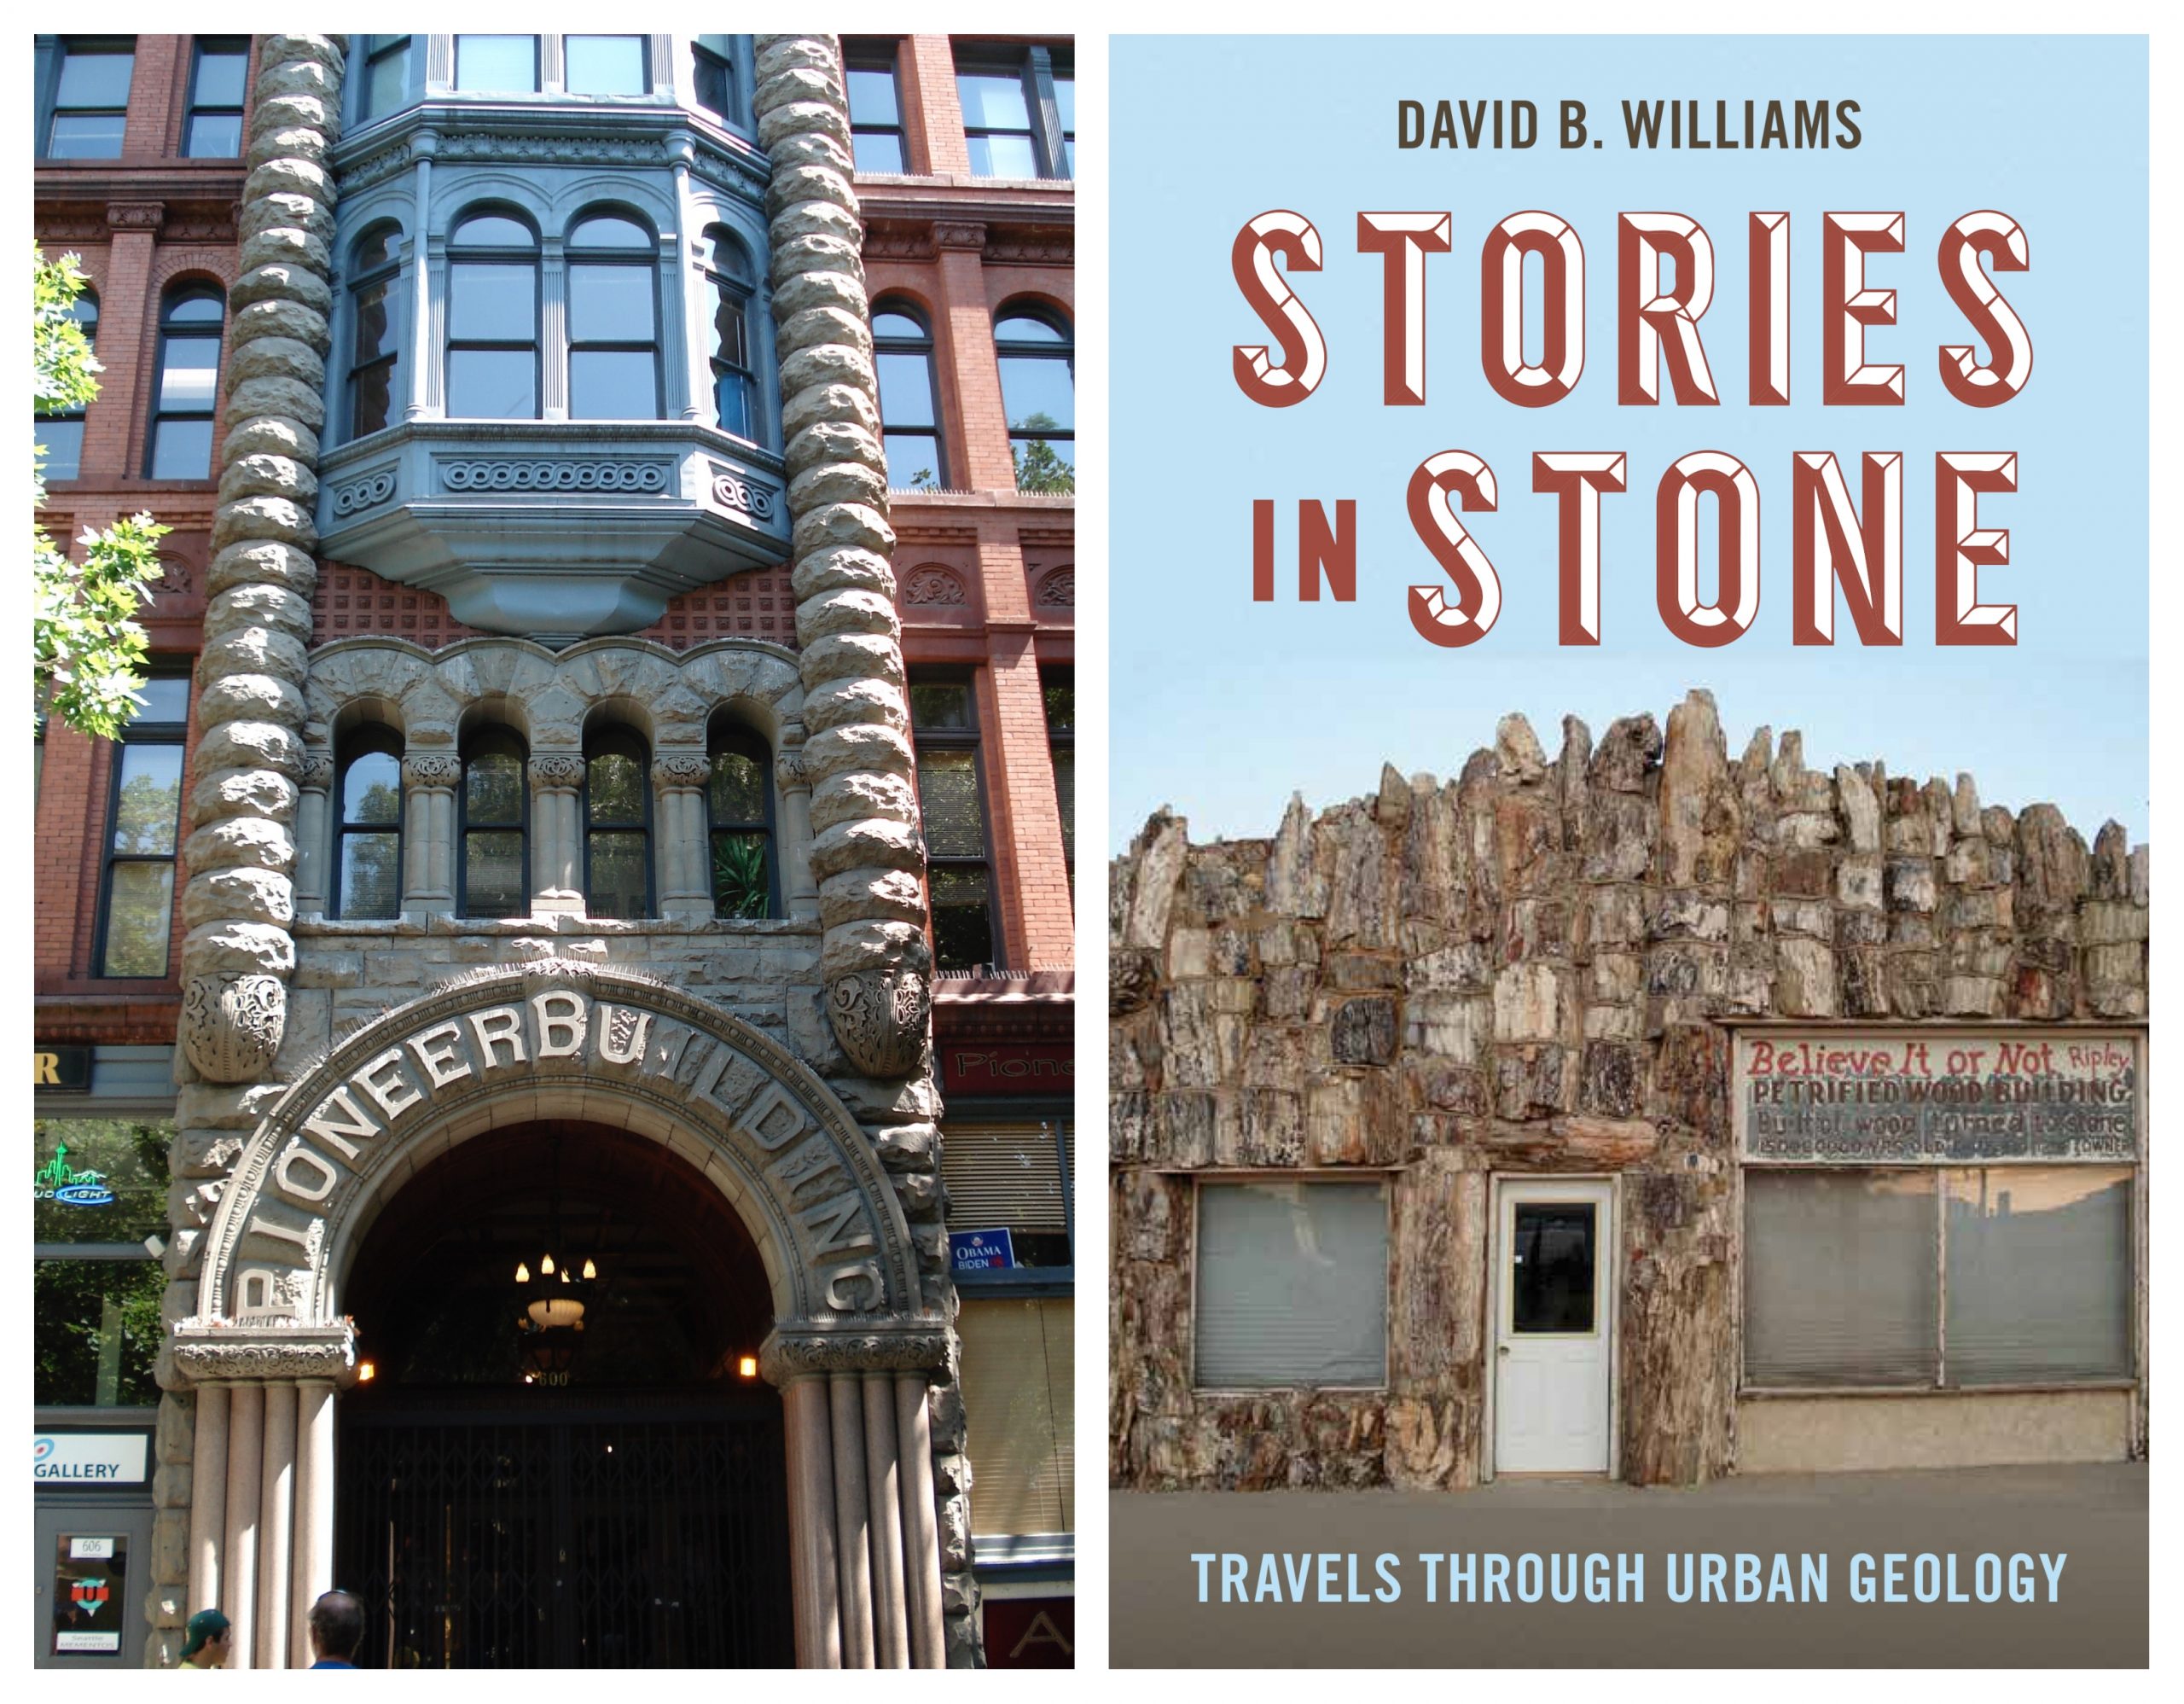 Pioneer Building in Seattle and book cover of 'Stories in Stone' by David B. Williams